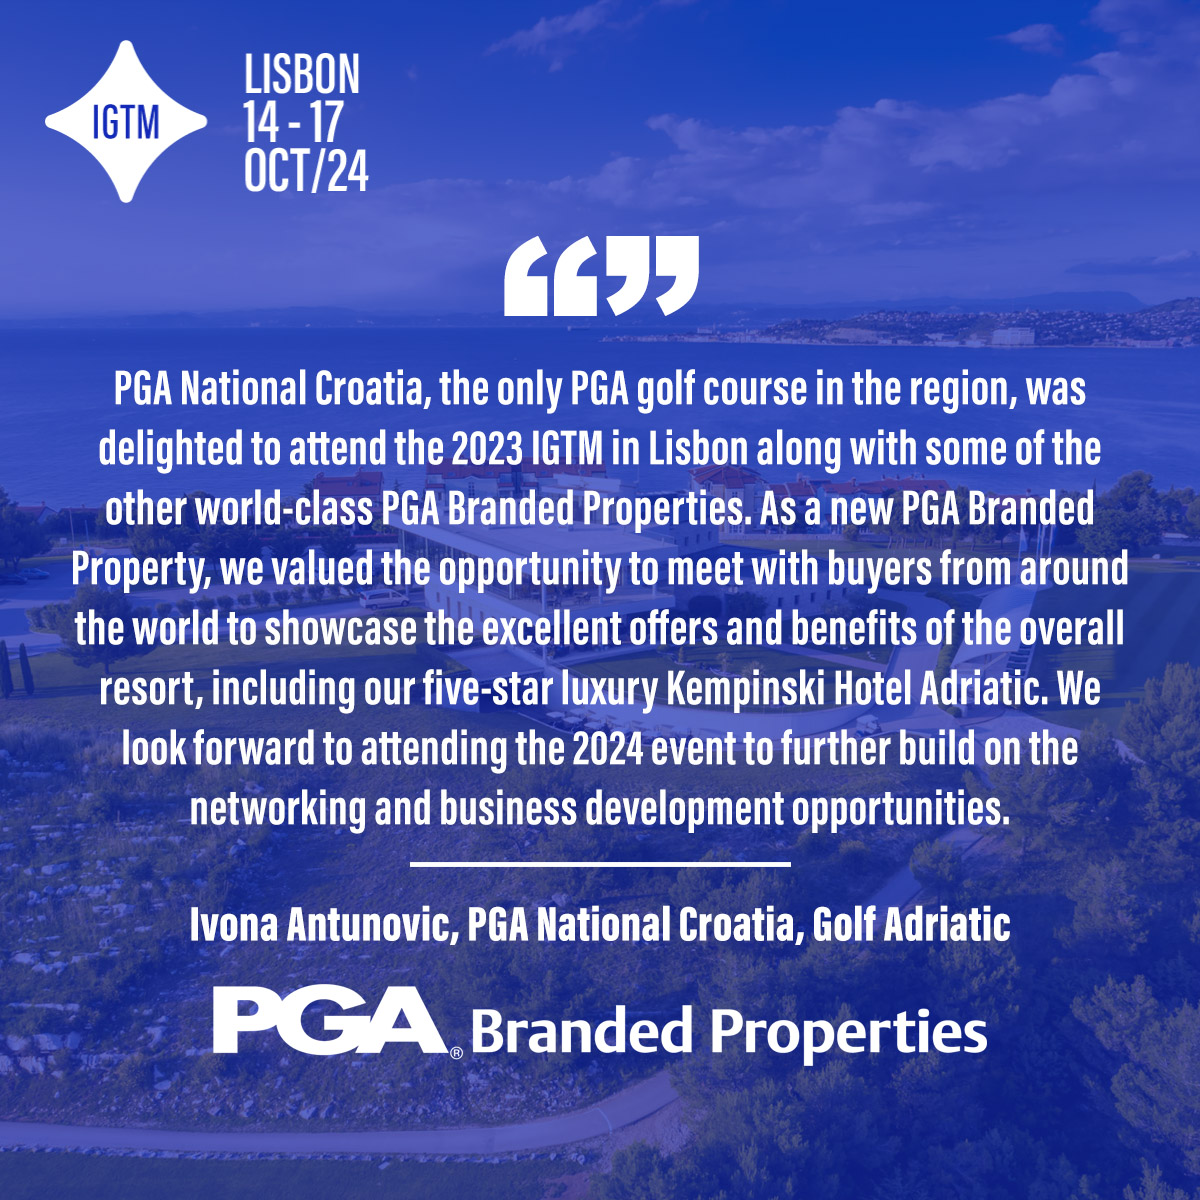 IGTM is pleased to be working with @ThePGA again at this year's event to help showcase their PGA Branded Properties to the world of golf. If you're interested in exhibiting at IGTM this year, please get in contact, registration is now open! 📝 igtmarket.com